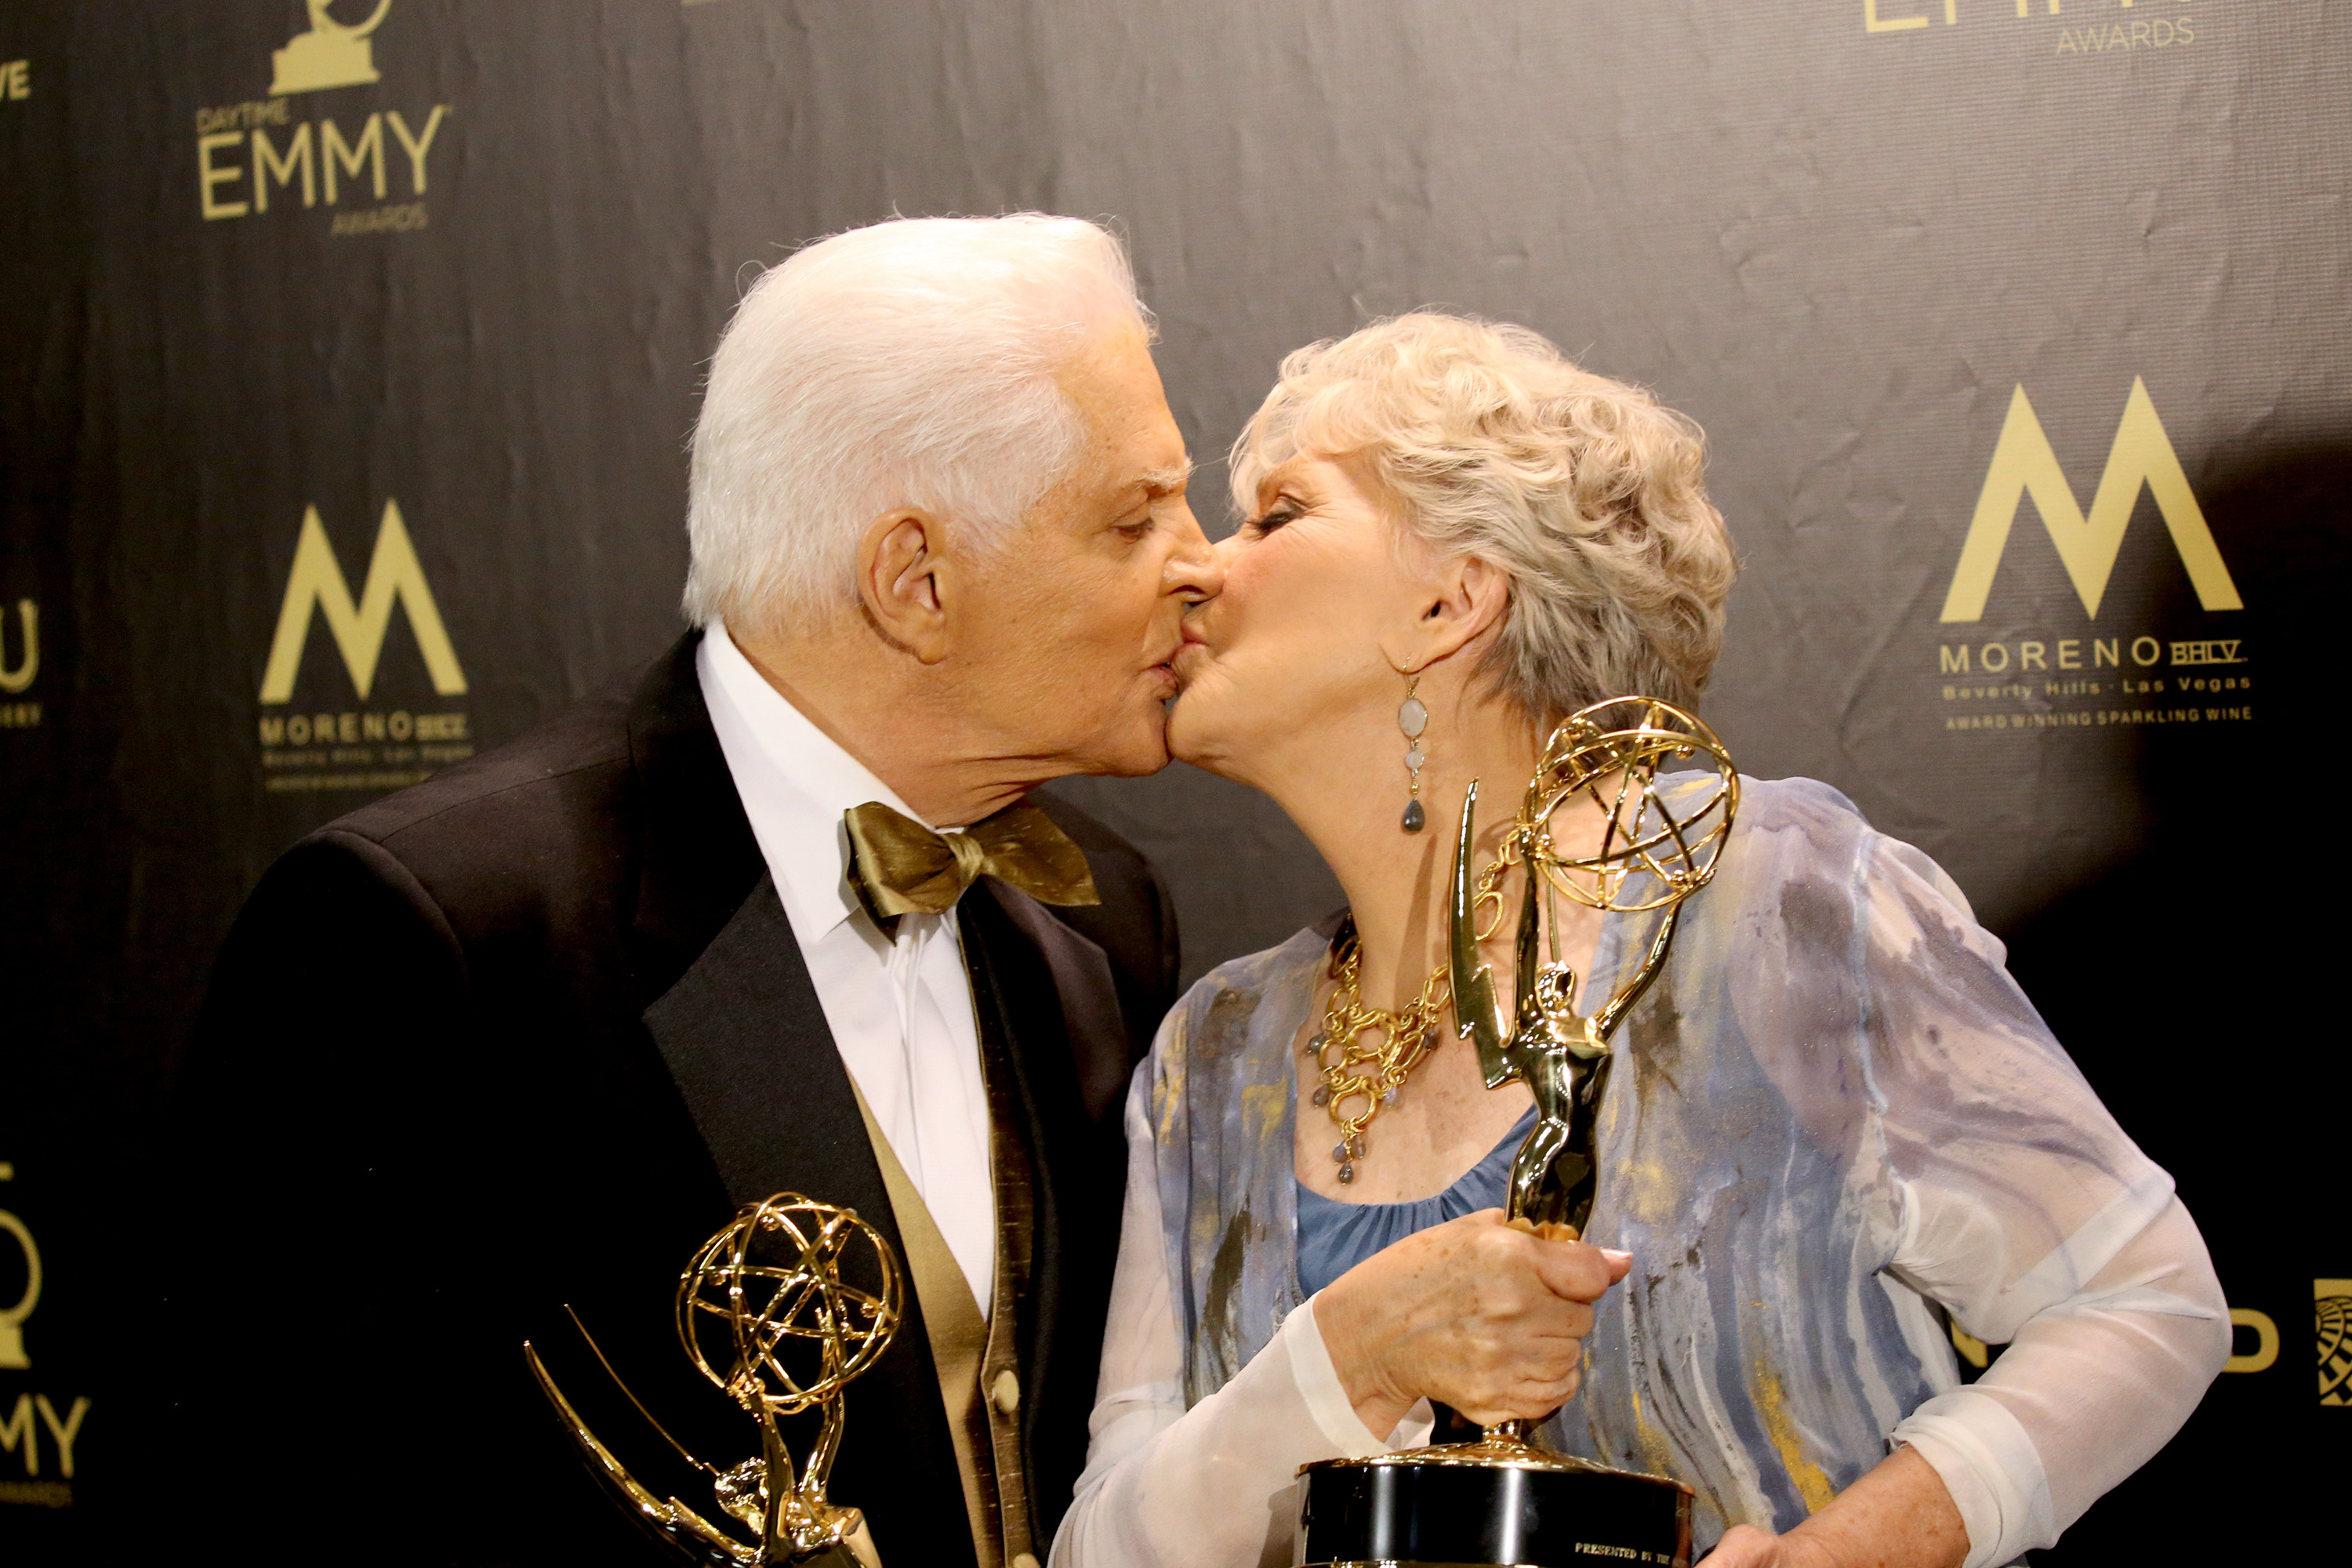 Bill Hayes and Susan Seaforth Hayes at the 45th annual Daytime Emmy Awards at Pasadena Civic Auditorium on April 29, 2018 in Pasadena, California | Source: Getty Images